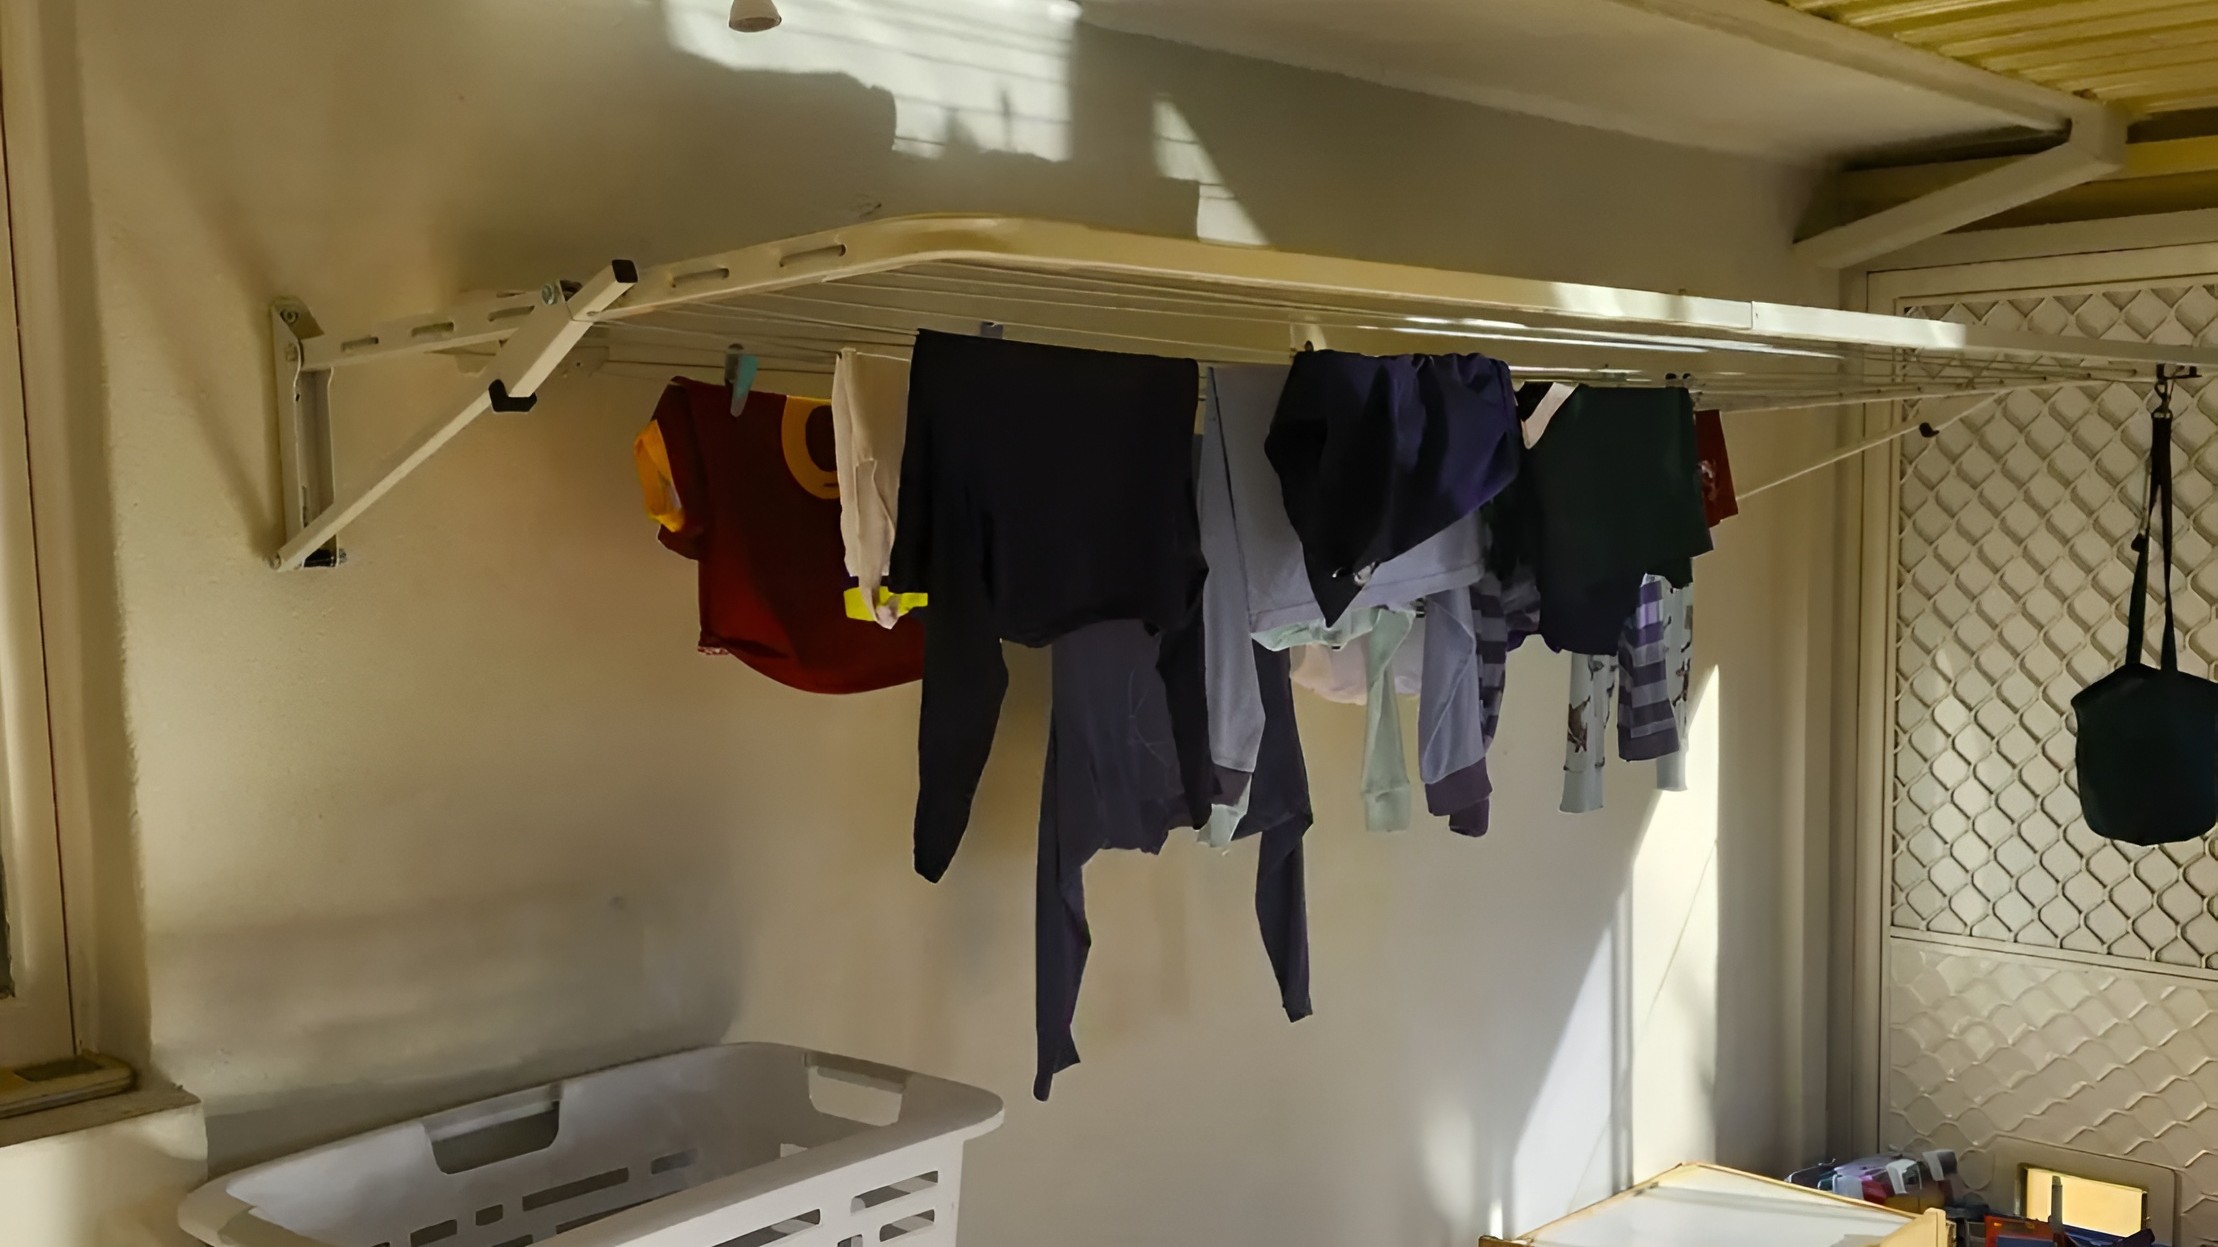 Heavy Duty Fold Down Clothesline Wall Mounted Wonders: Maximize Your Drying Area